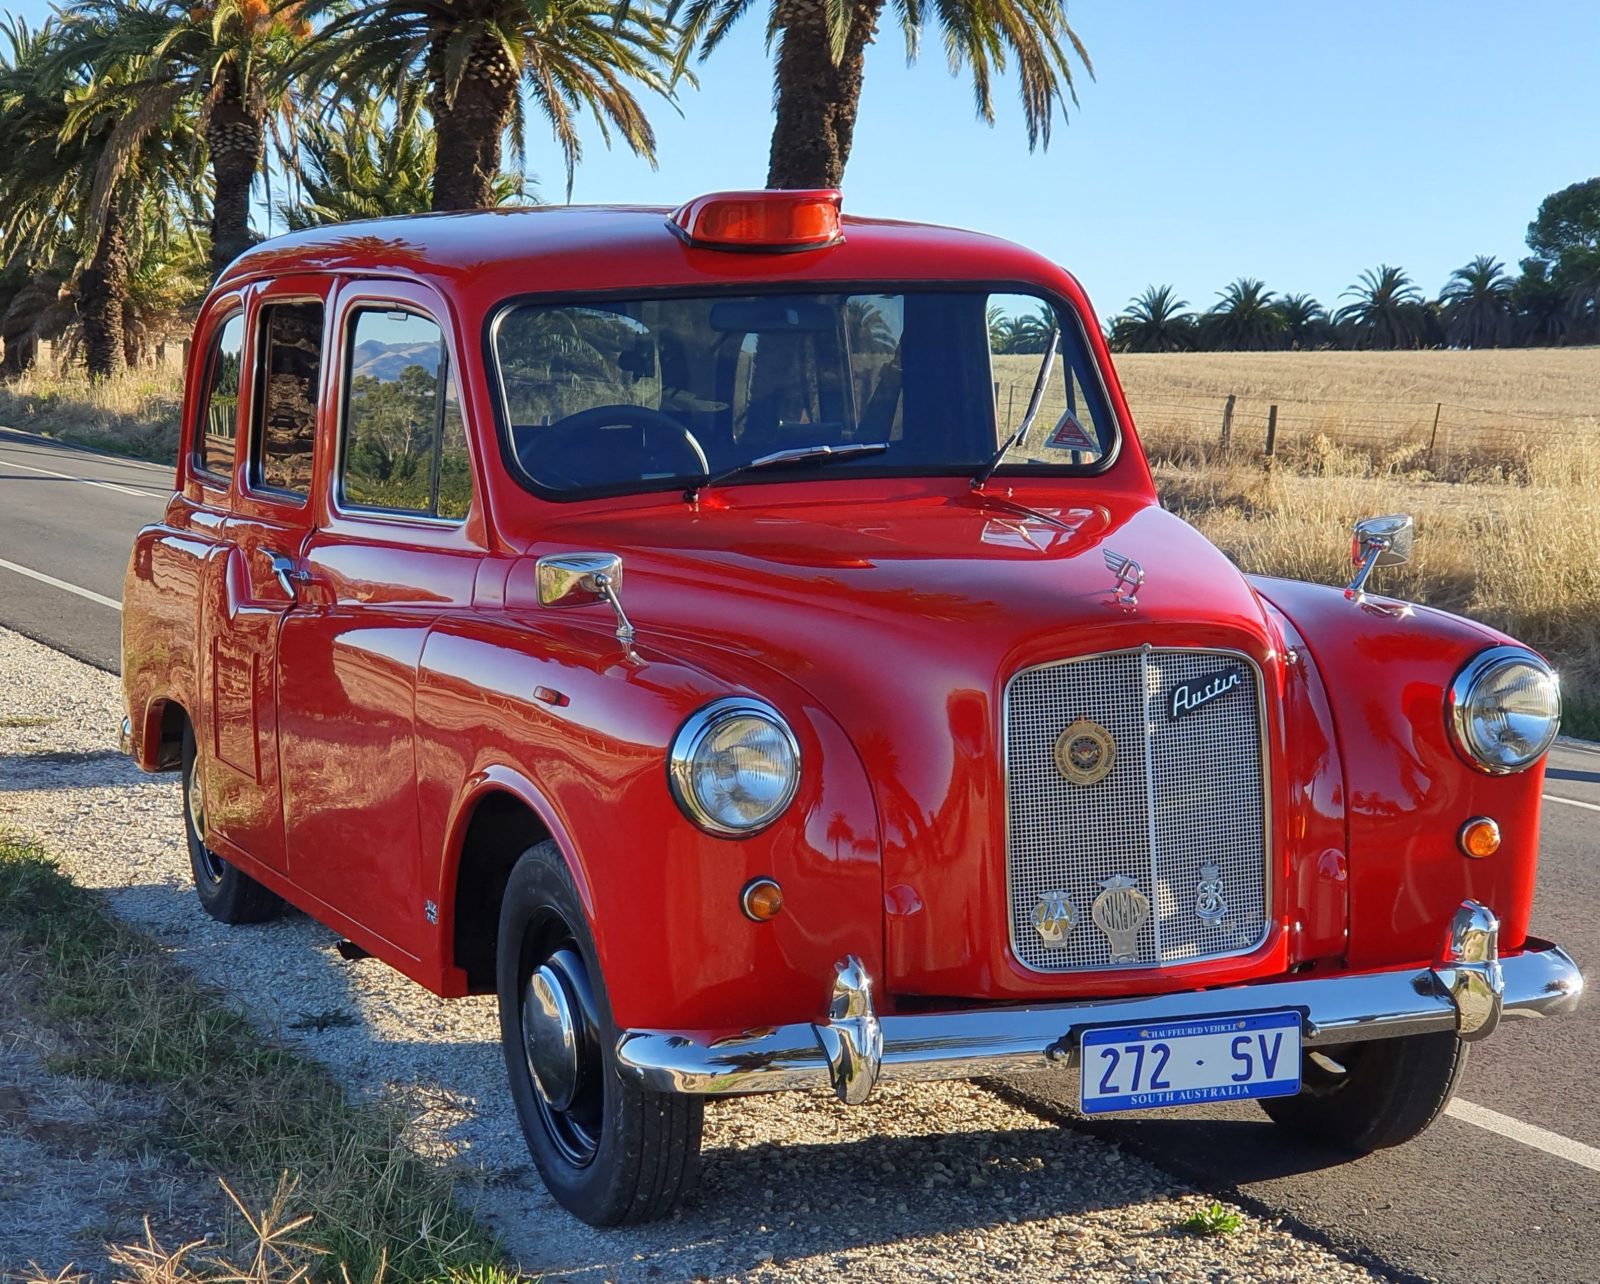 A fun way to tootle around The Barossa